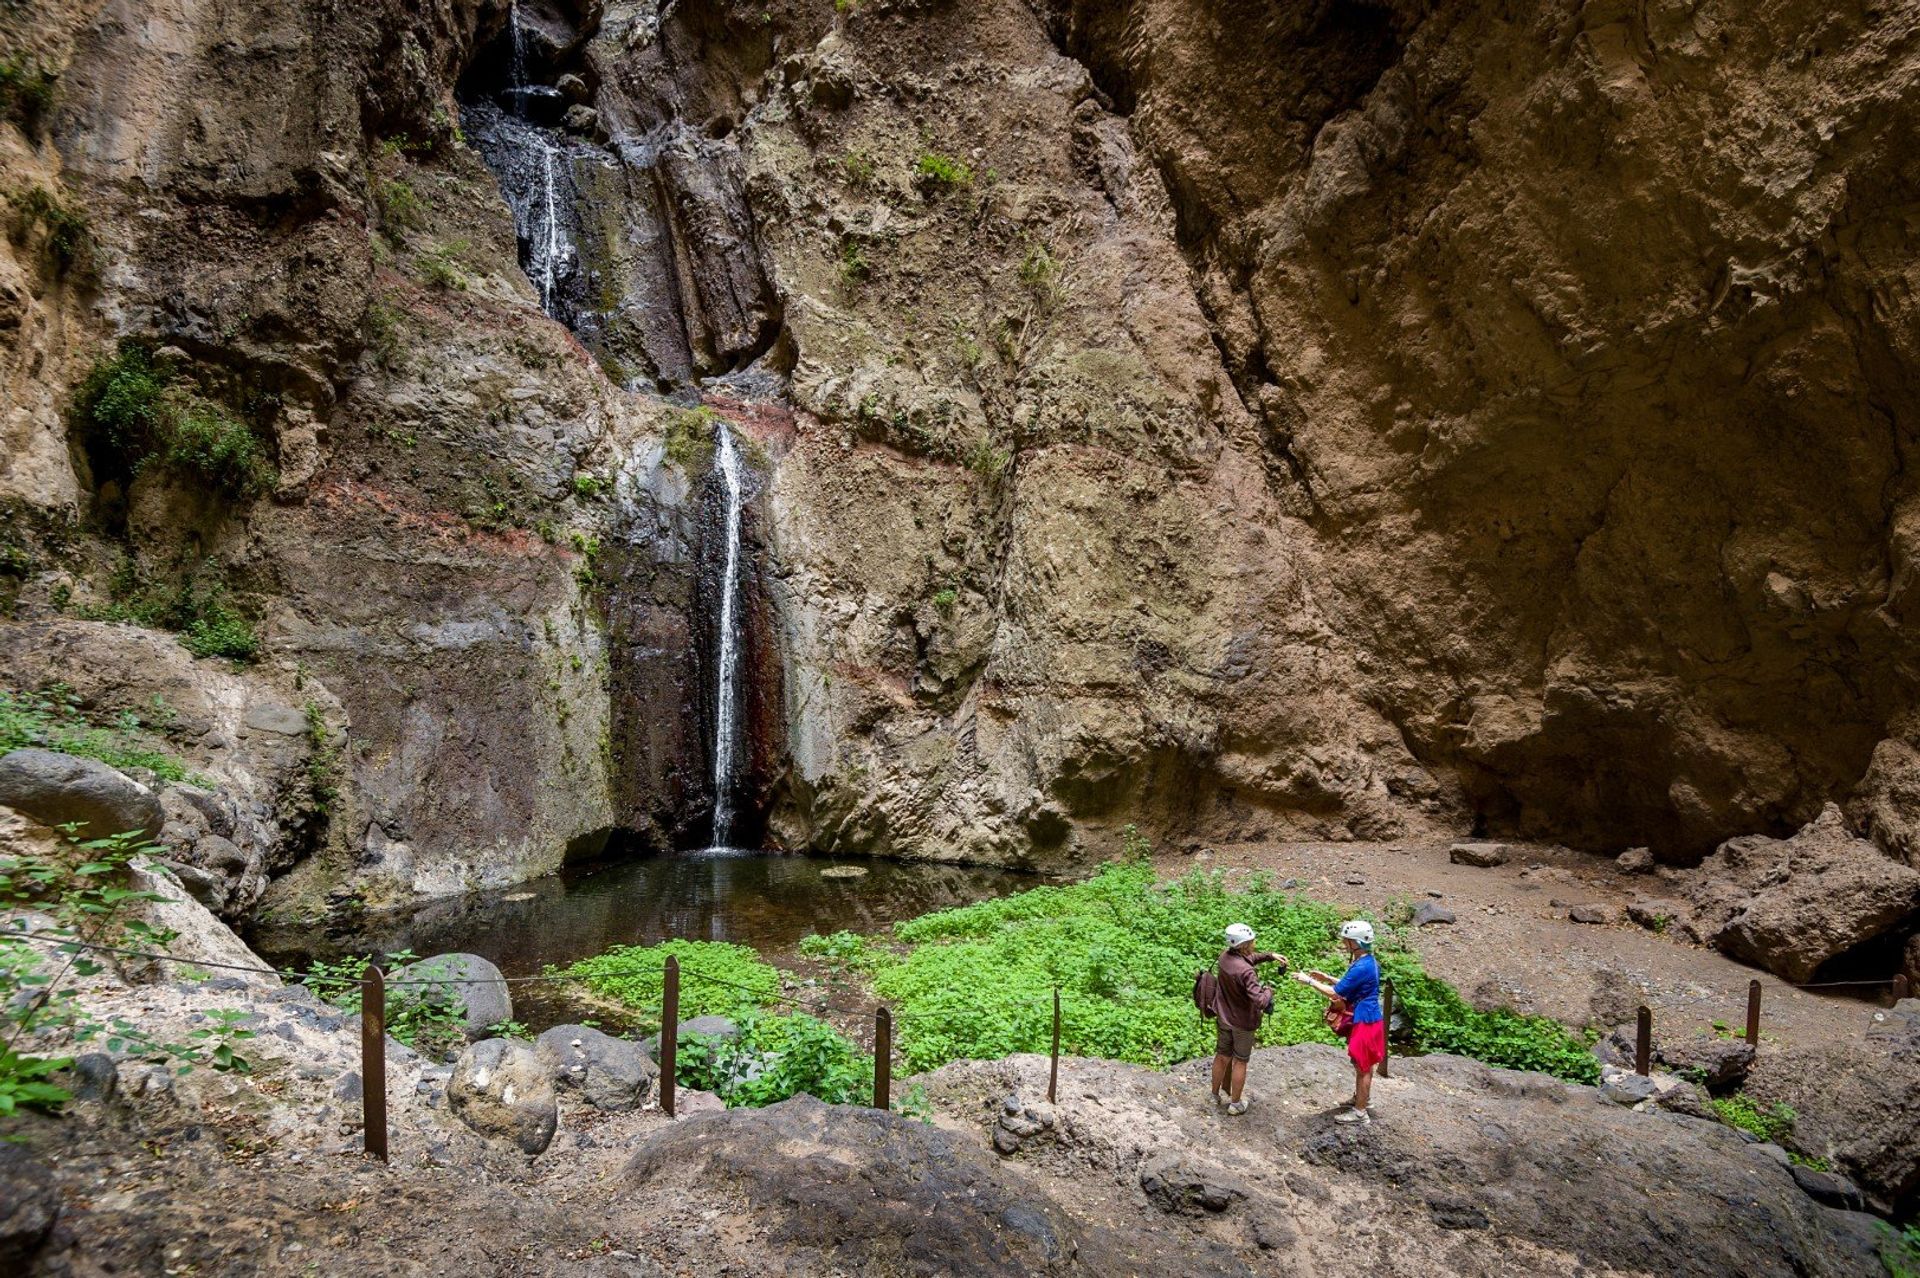 Check out the wilder side of Tenerife. The jaw-dropping scenery in Barranco del Infierno is off the charts